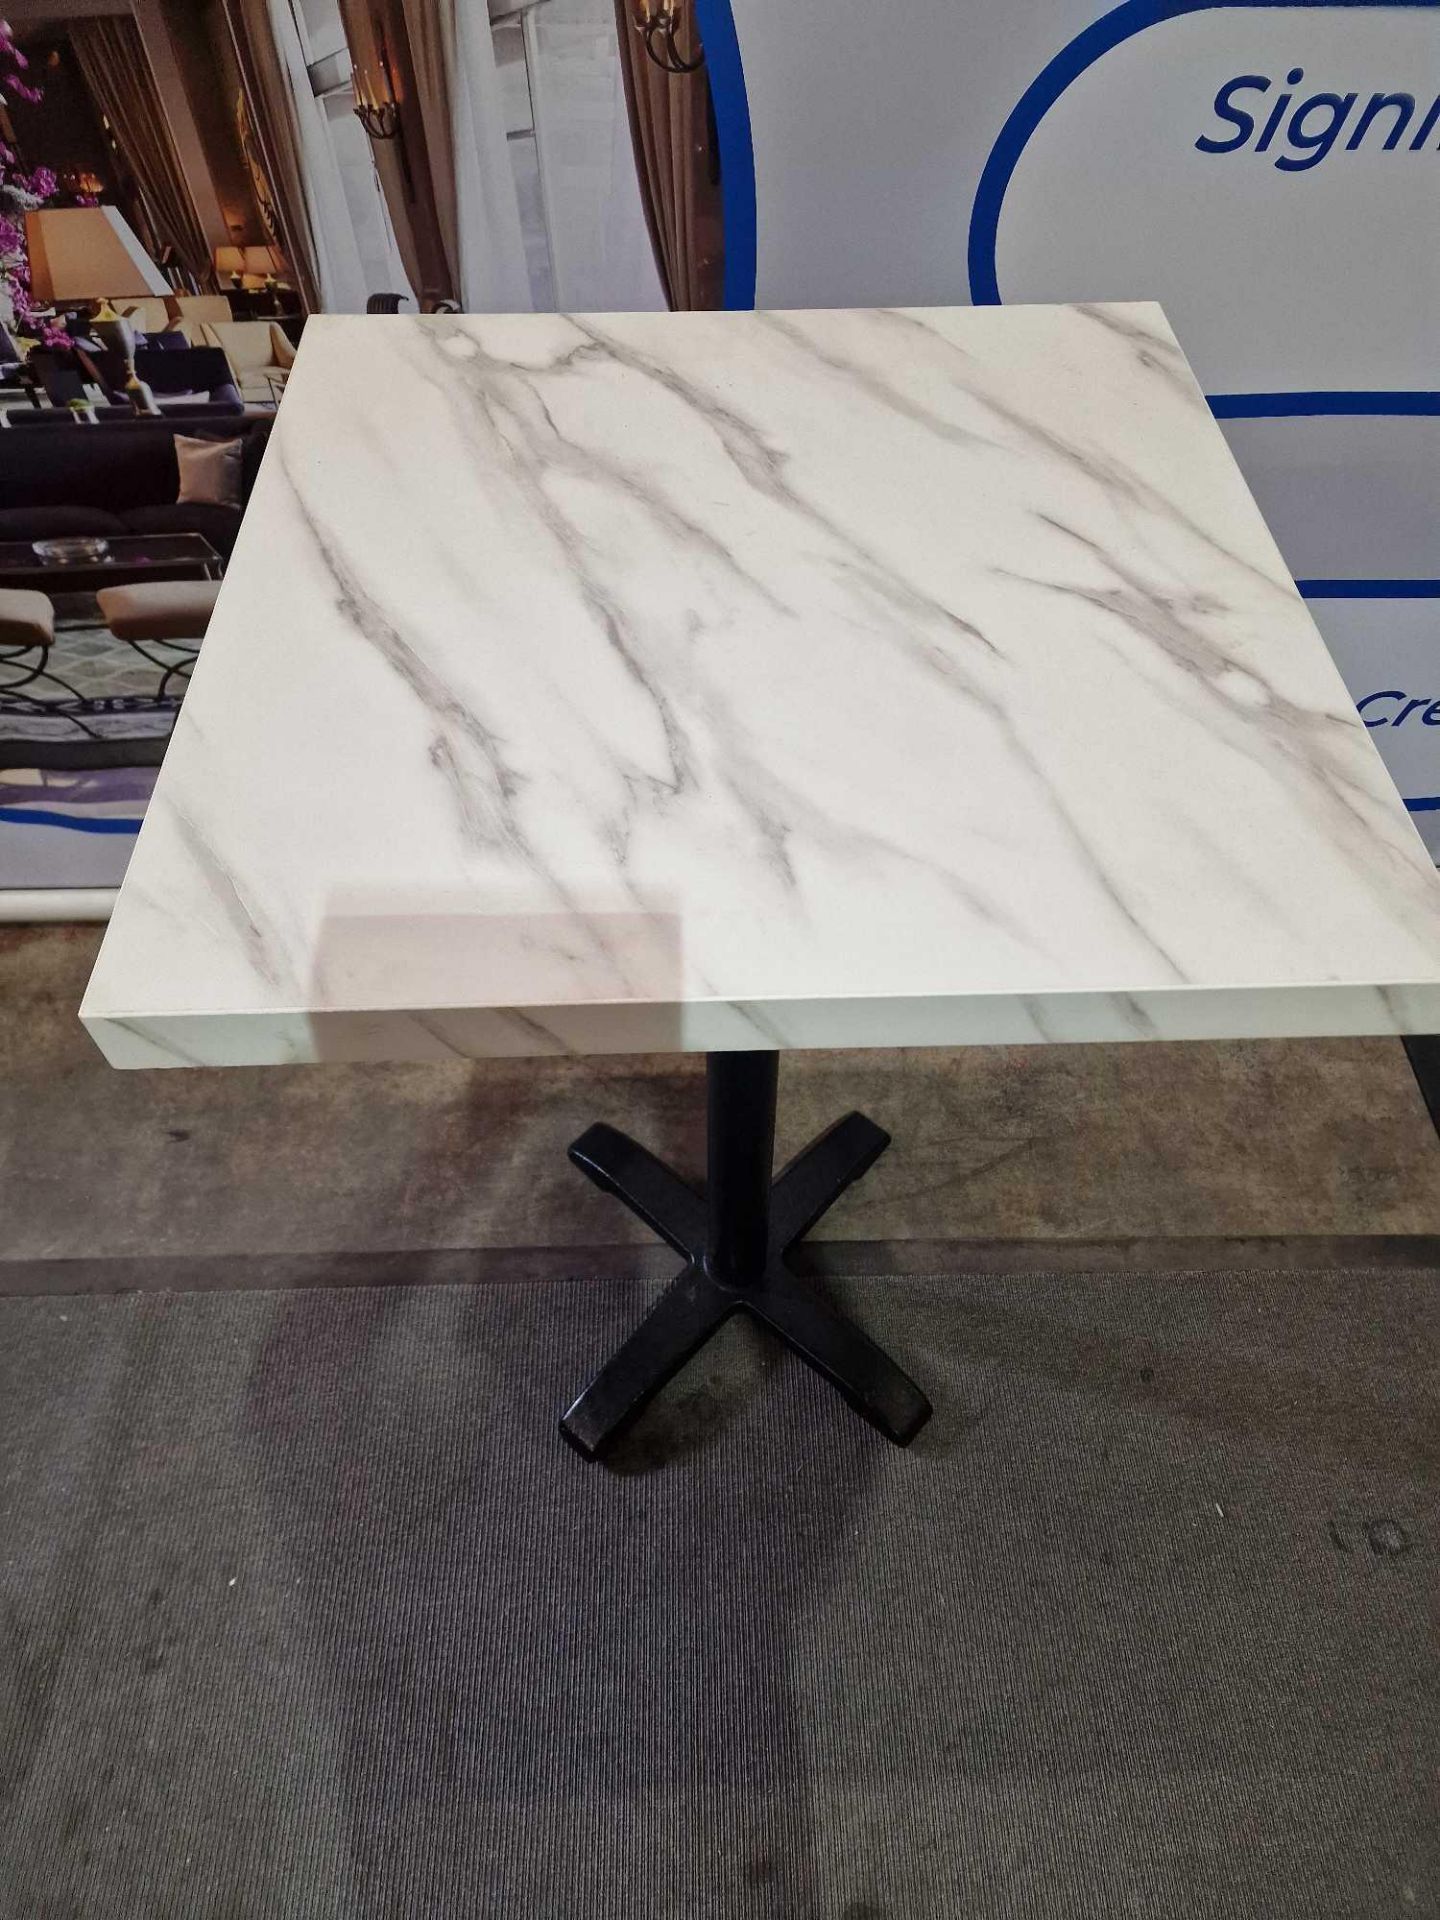 Bolero square poser table faux marble top poser table on black powder coated pedestal 70 x 70 x - Image 2 of 3